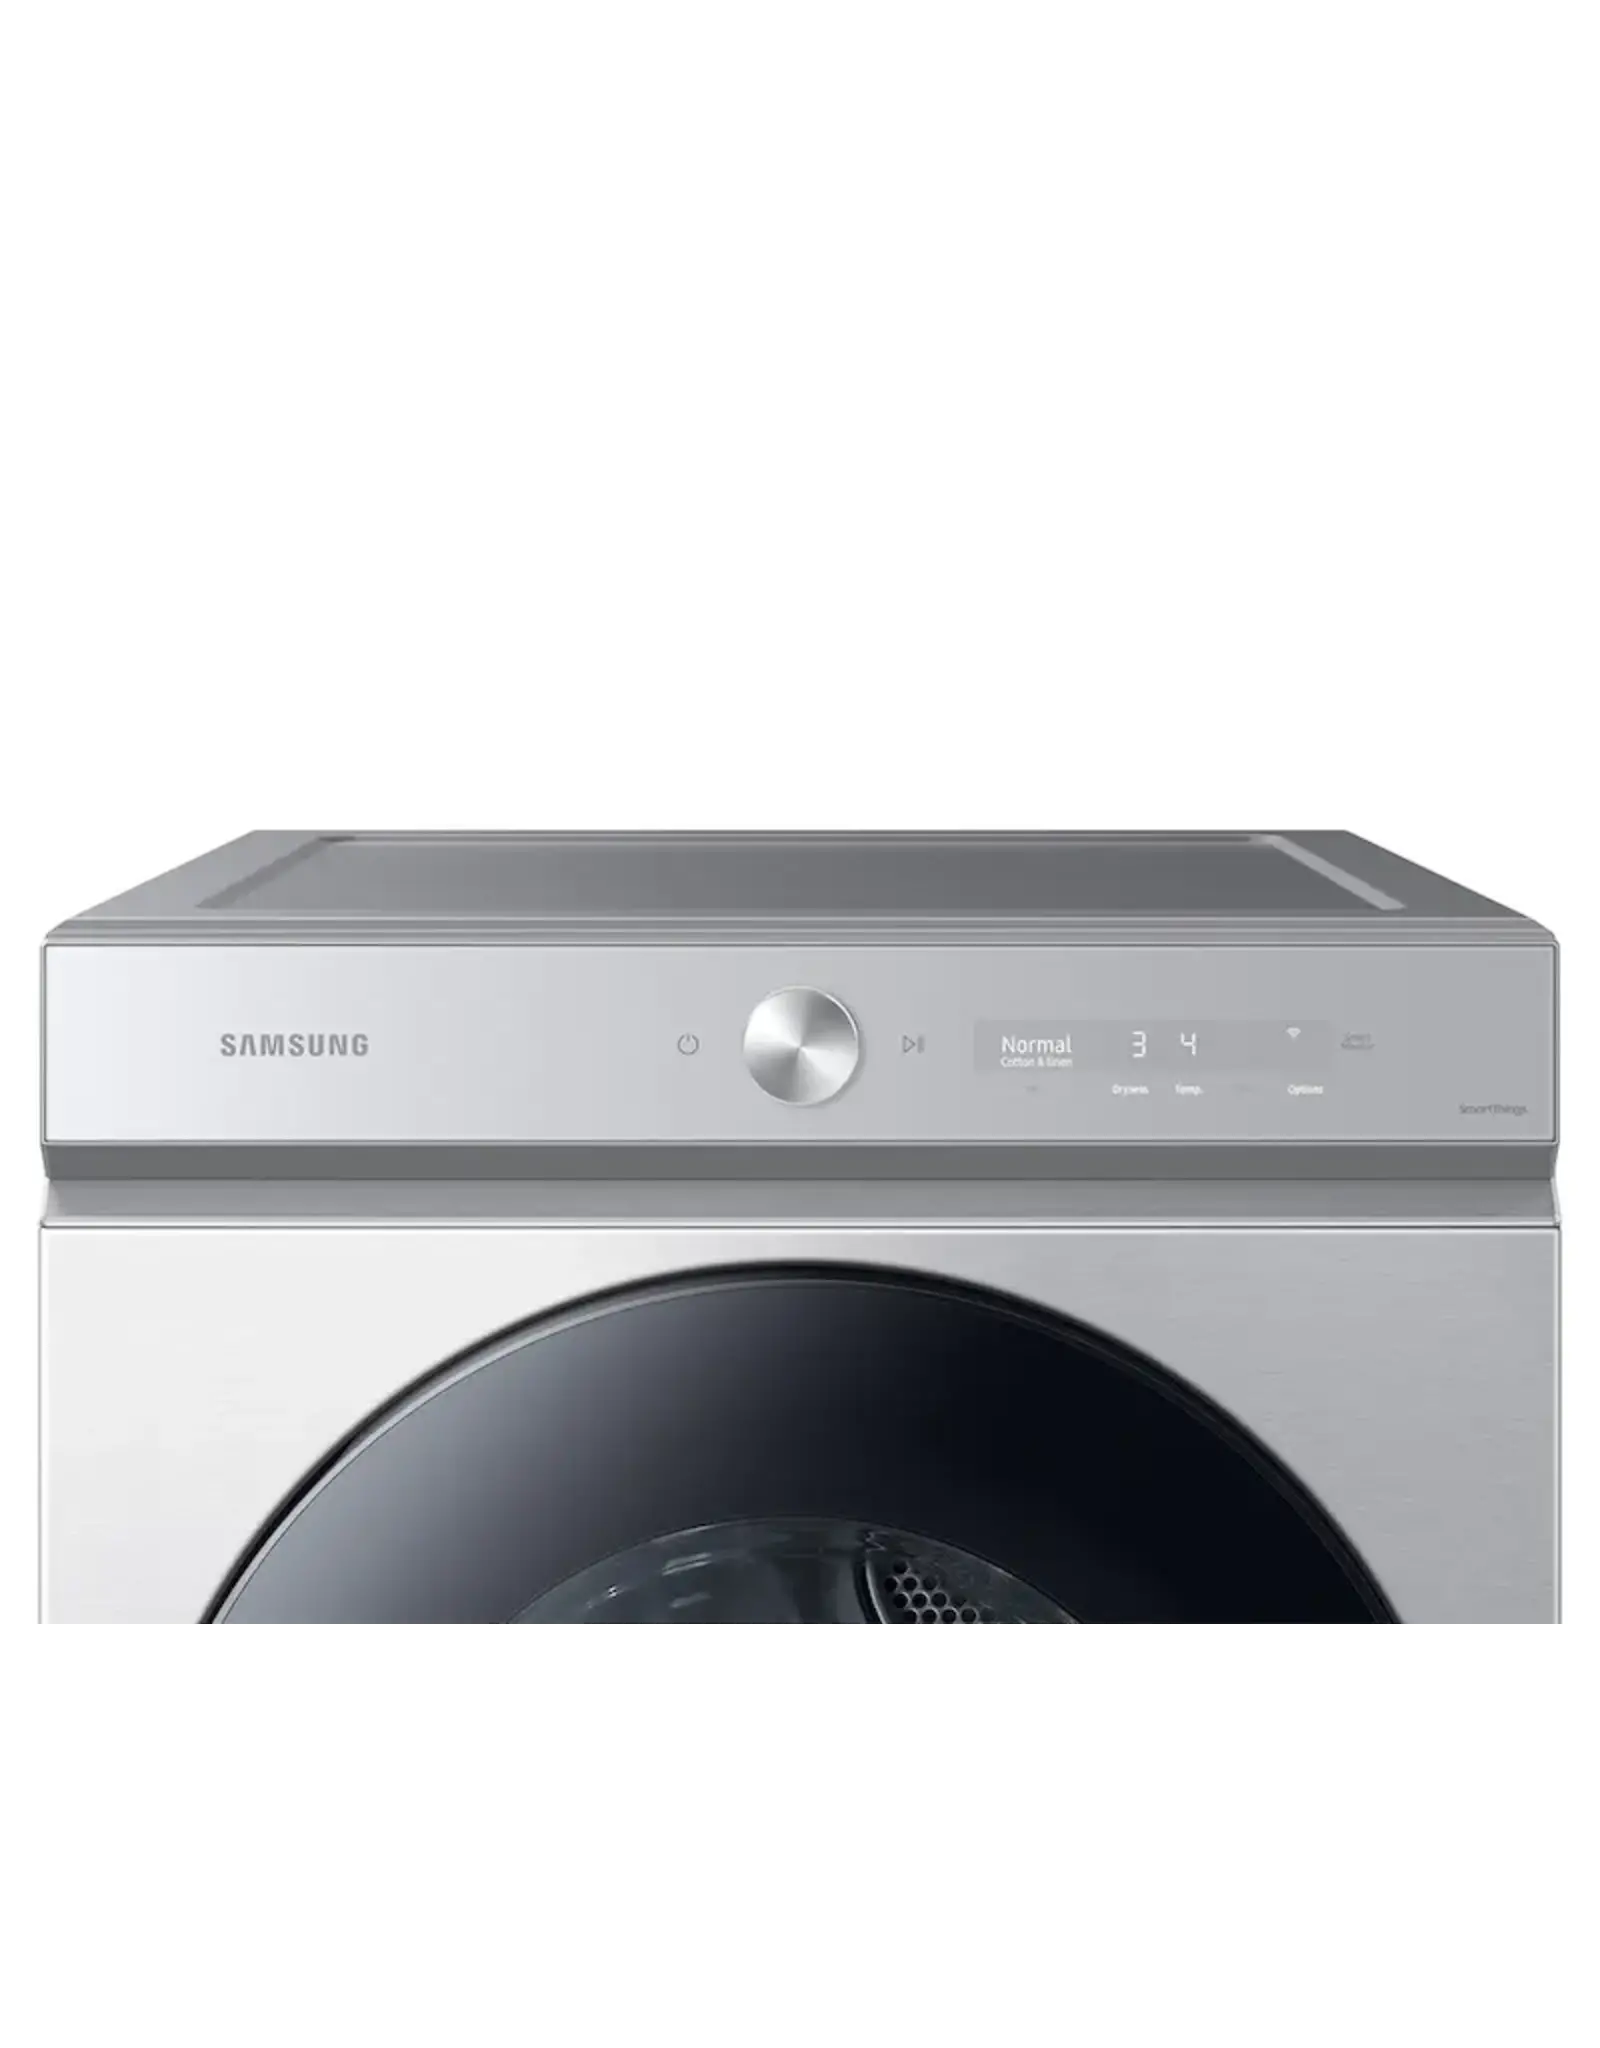 SAMSUNG Ck. DVE53BB8900T Samsung Bespoke 7.6 cu. ft. Vented Smart Electric Dryer in Silver Steel with AI Optimal Dry and Super Speed Dry